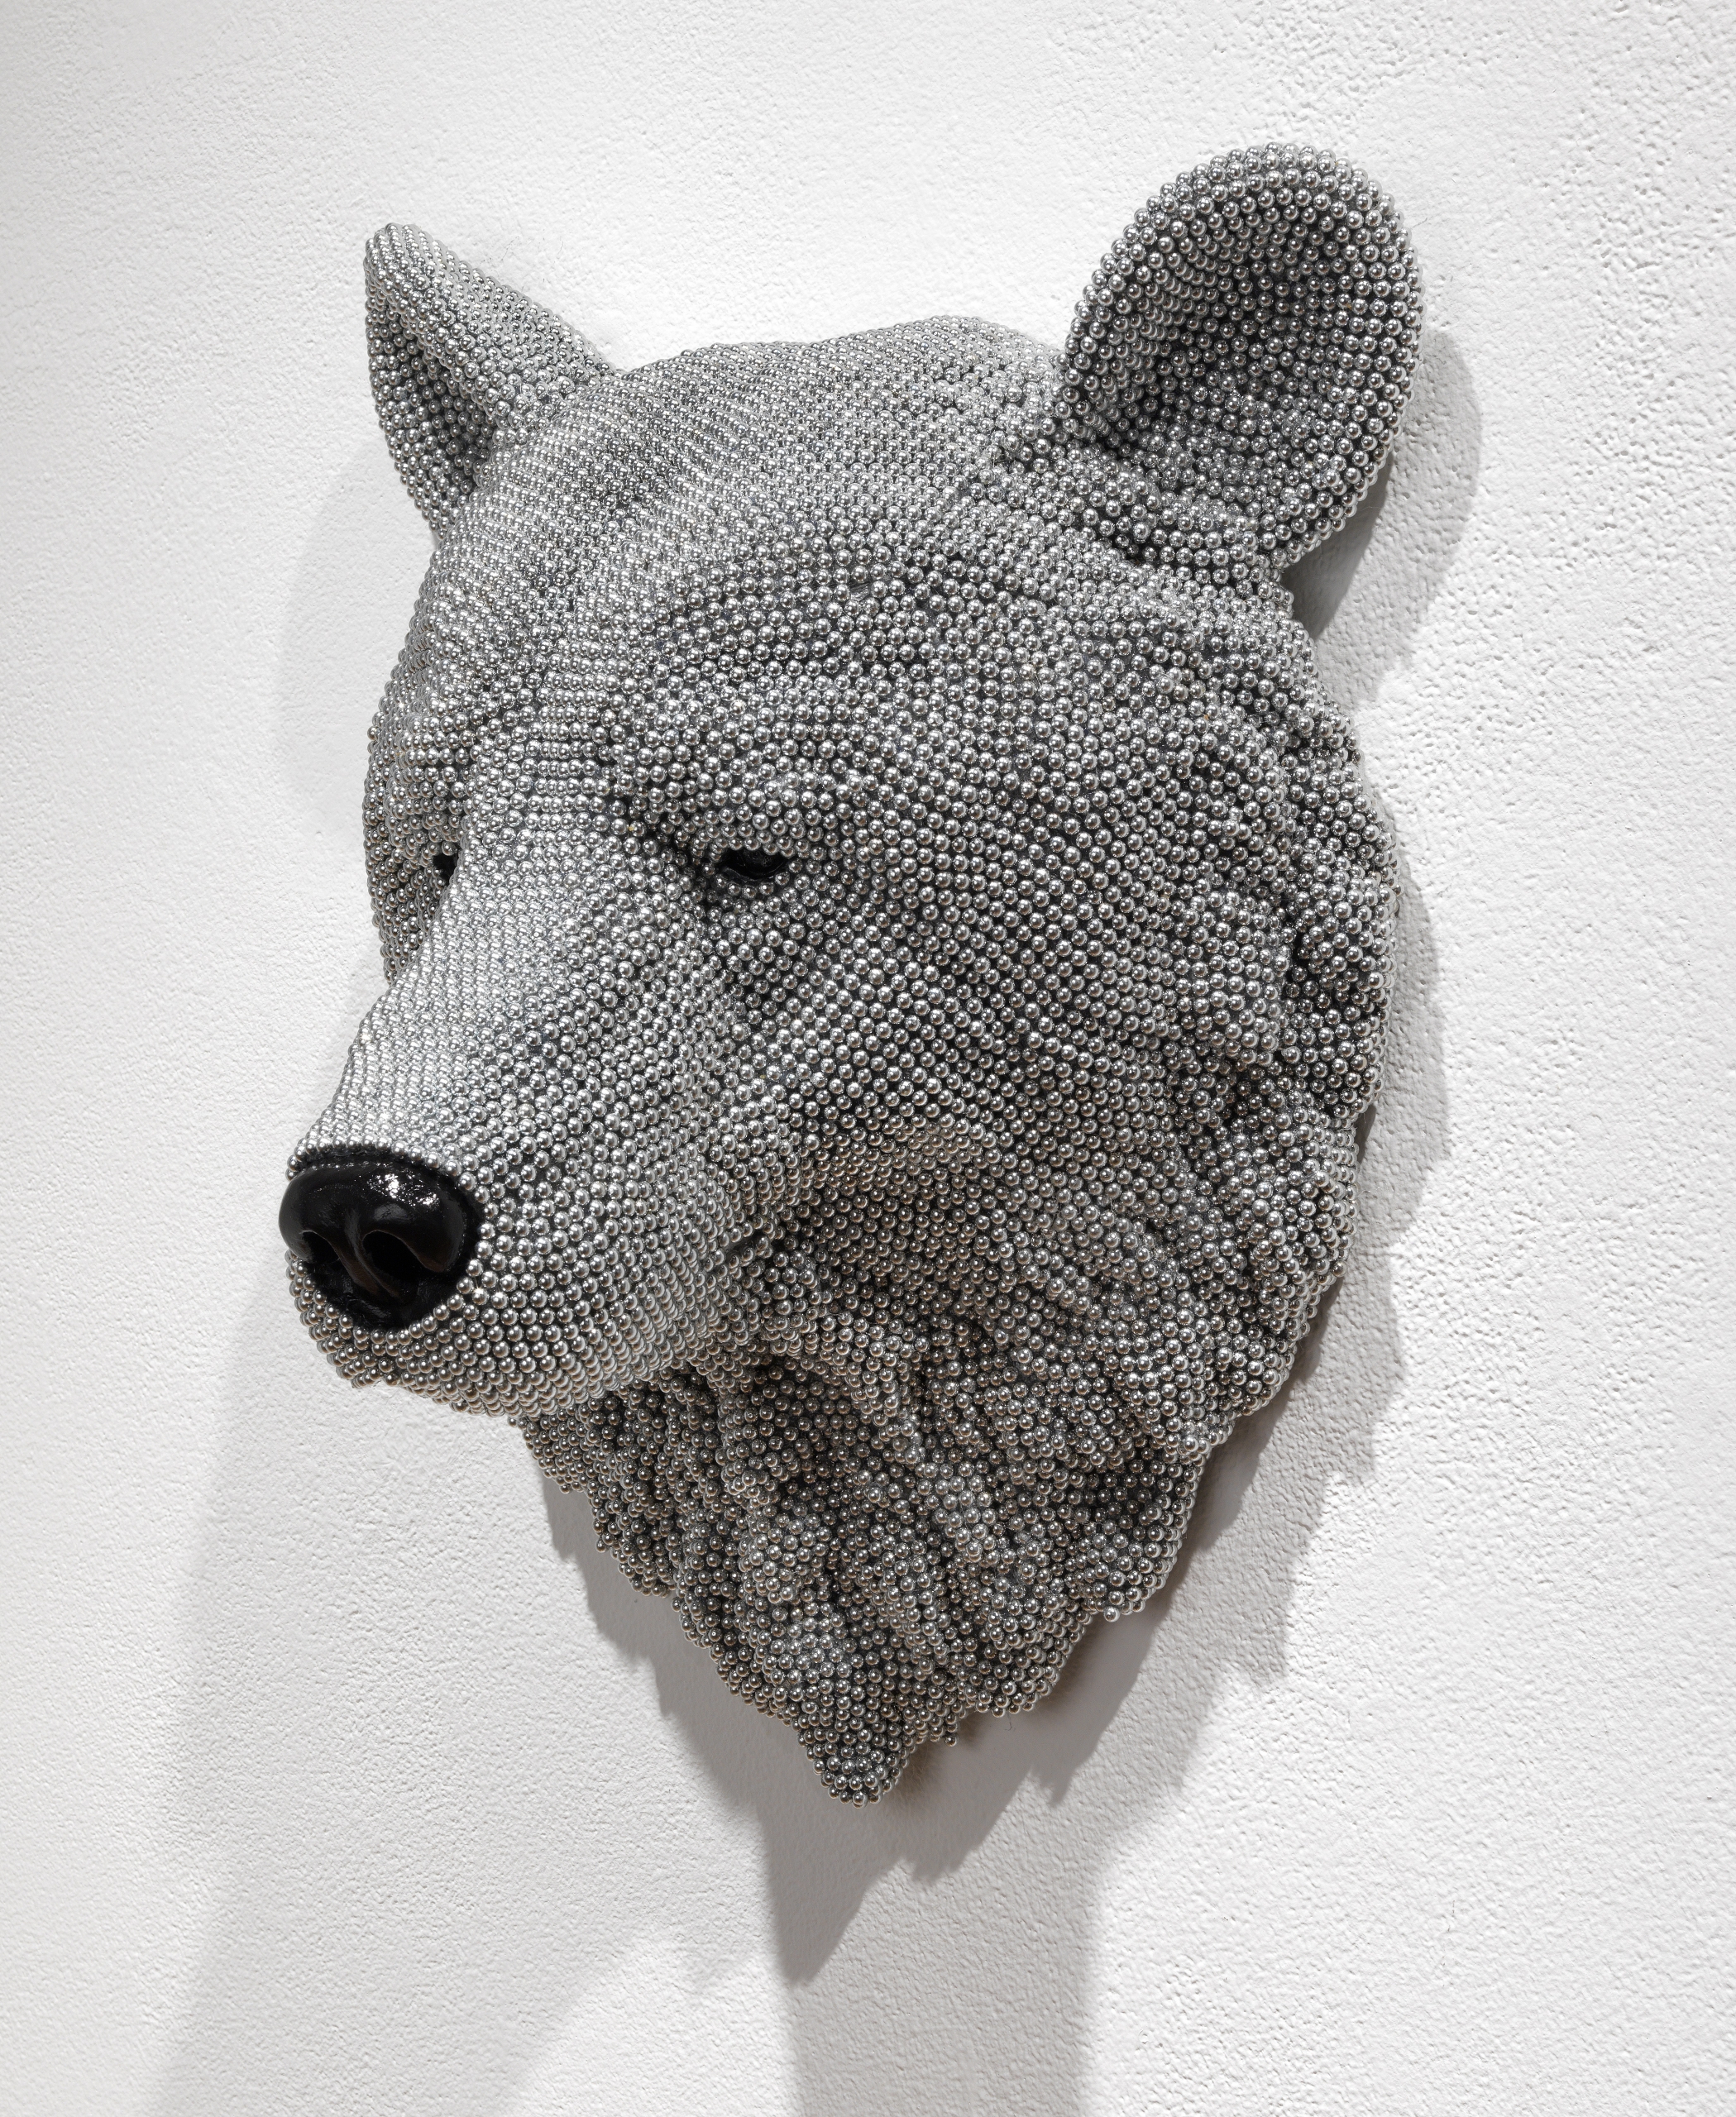 Timmermans, Bear (HiRes), 2014, cast resin, air rifle BBs, mixed media, 17.5x13x9in. (2)